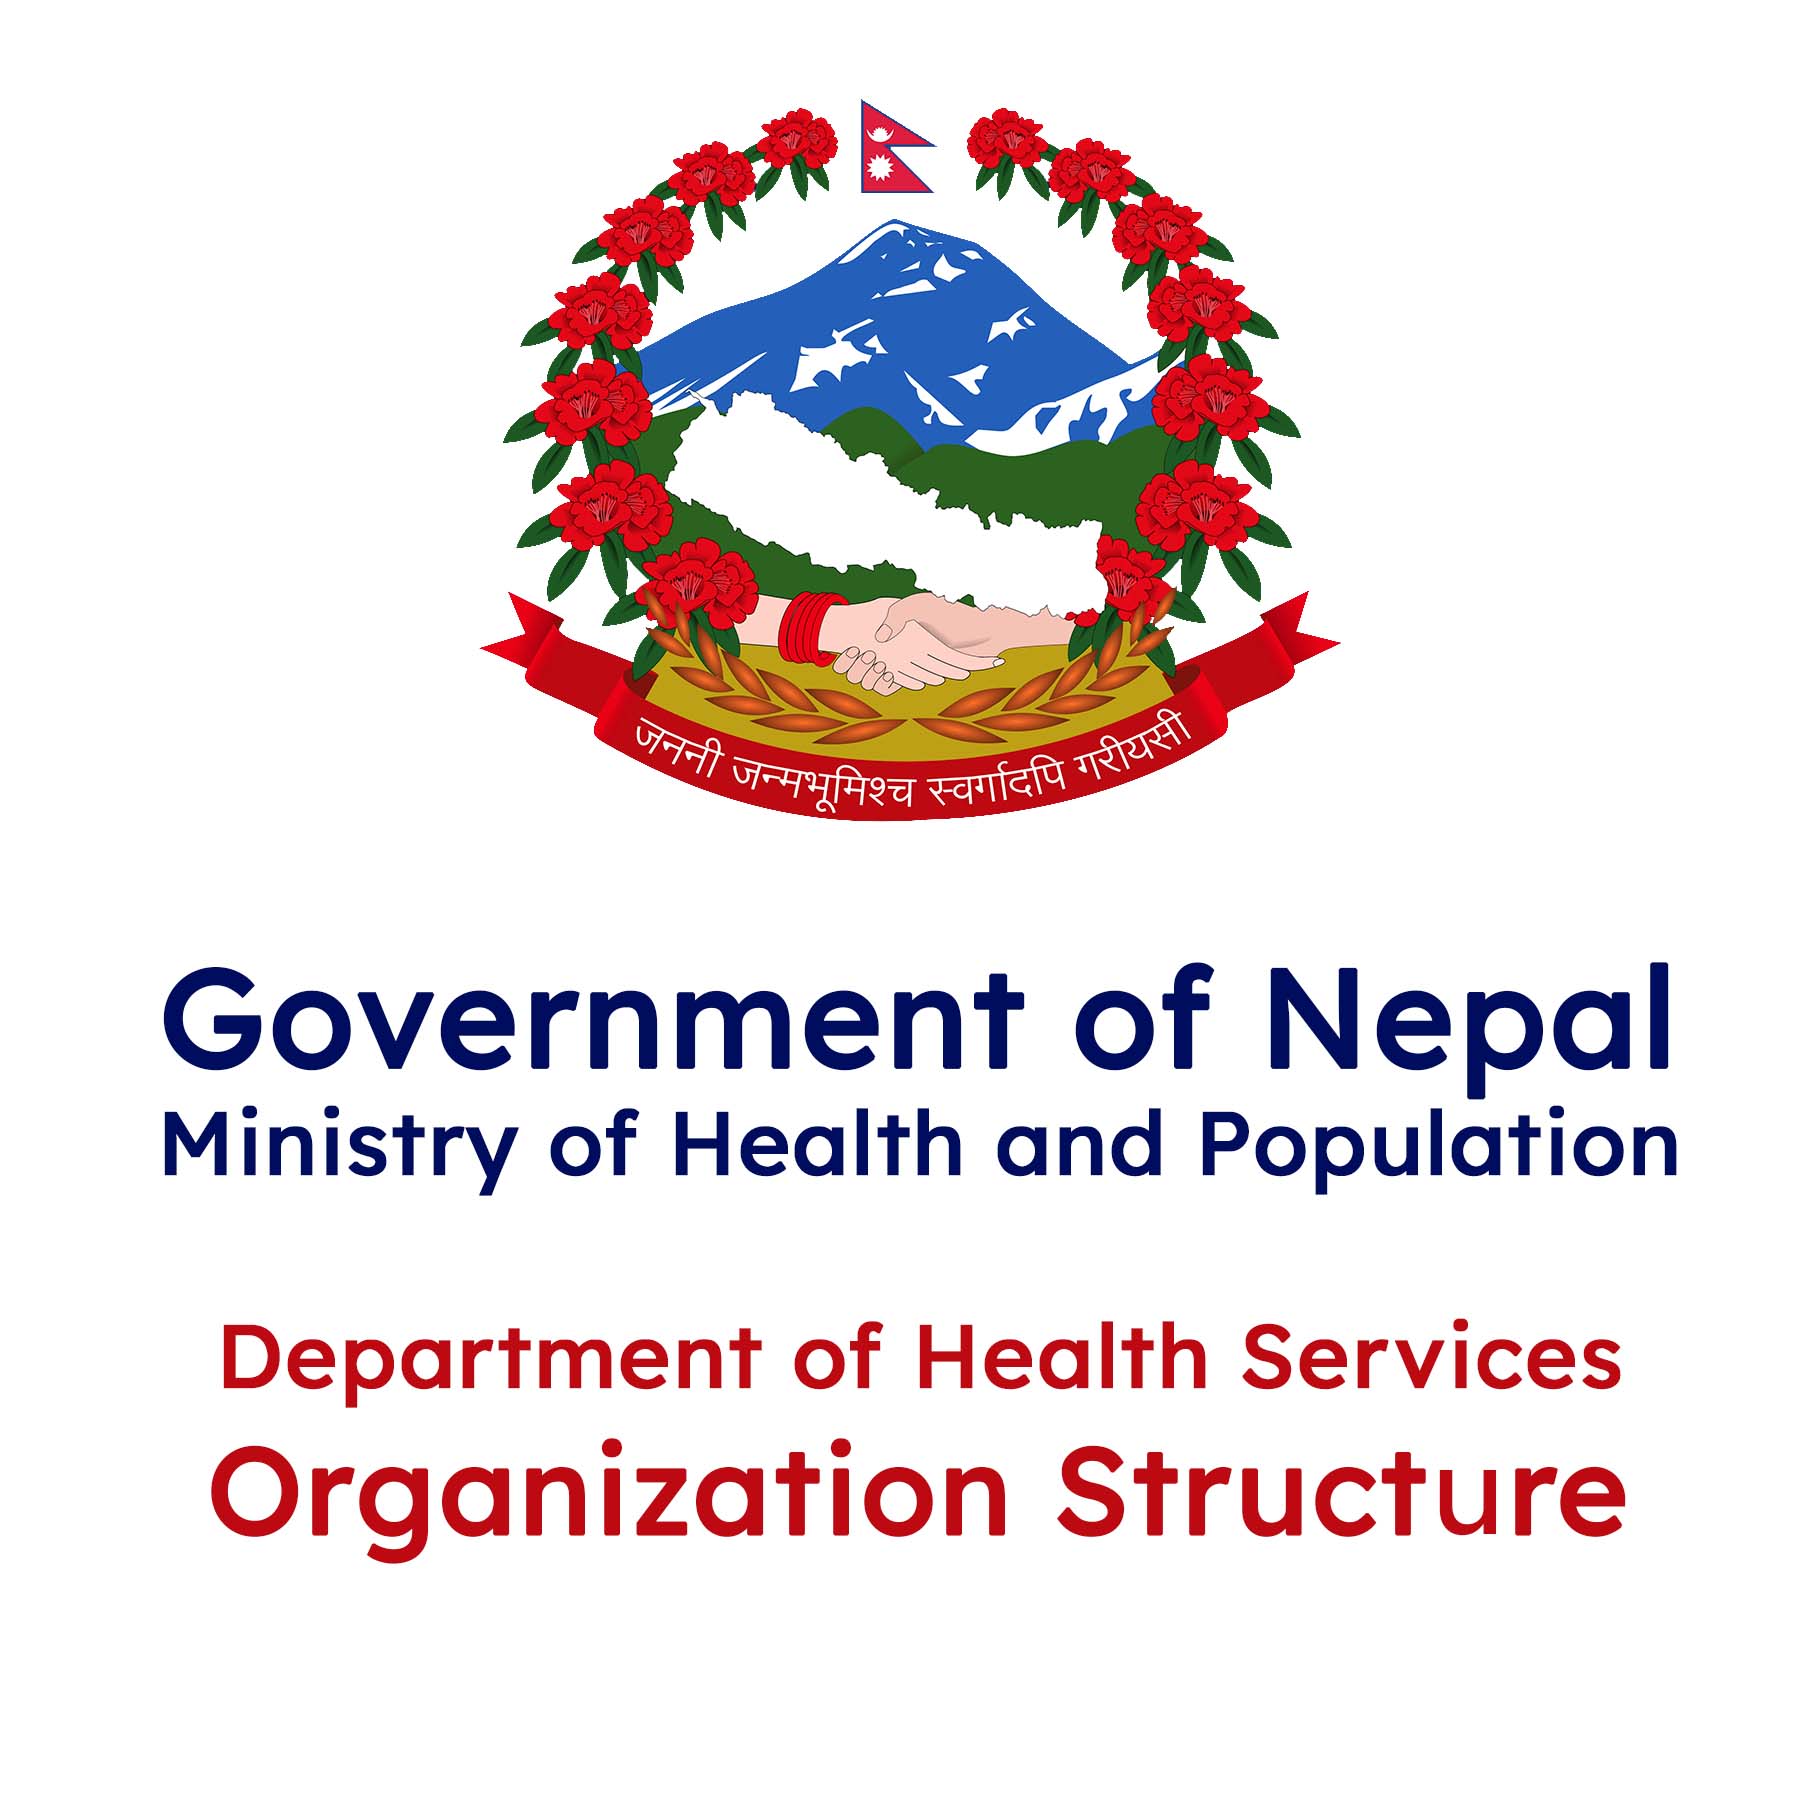 Organization Structure – Department of Health Services